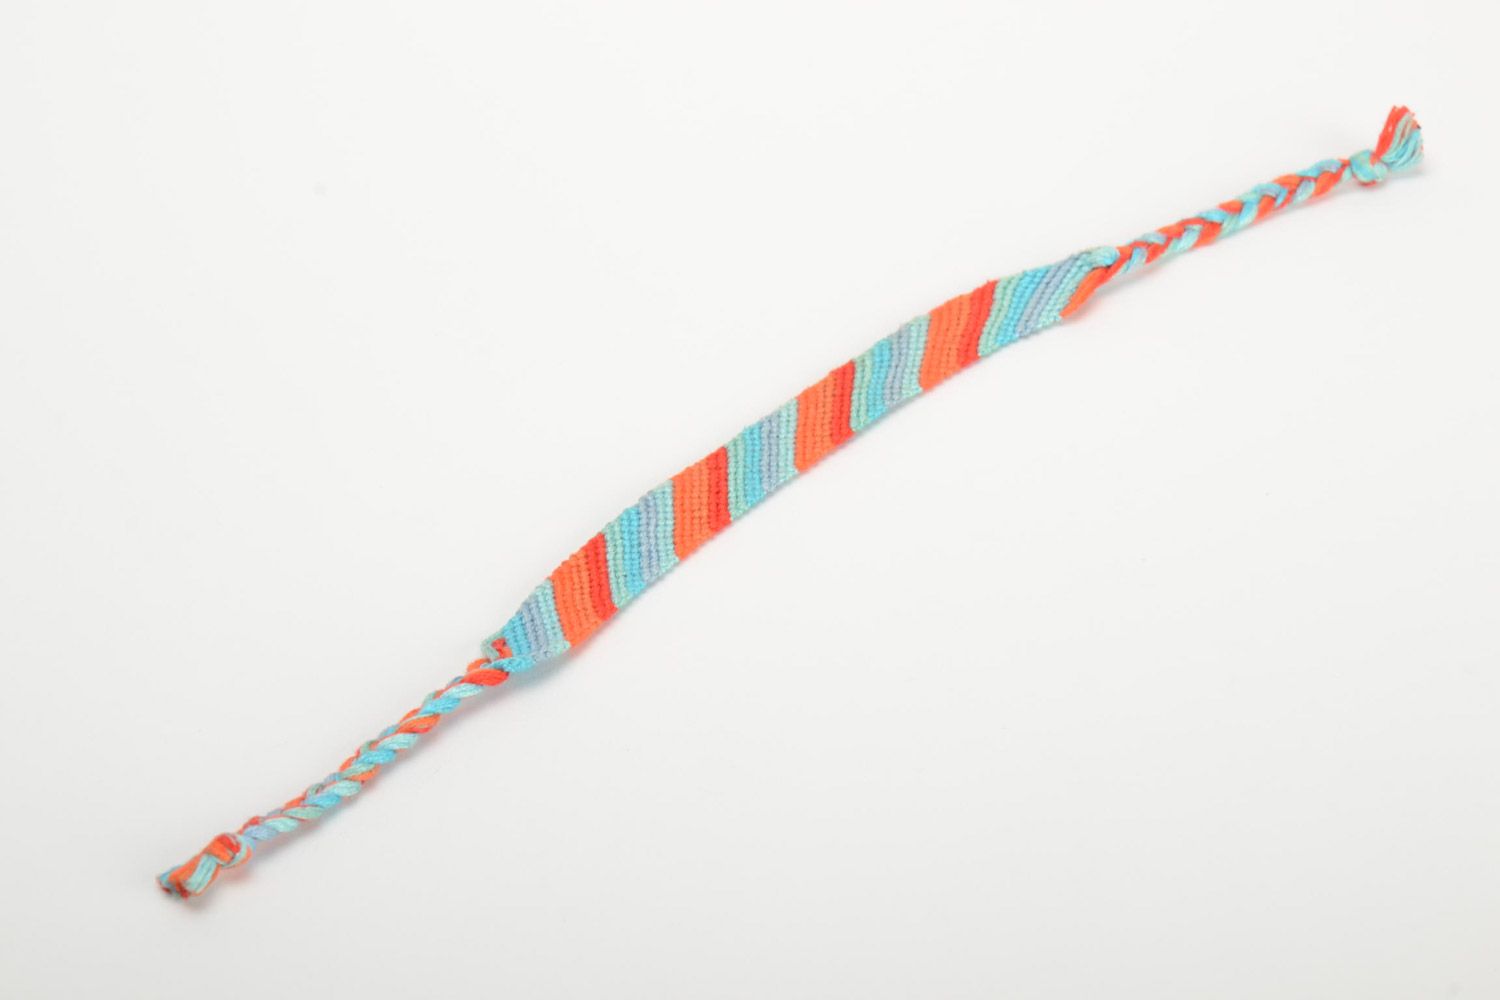 Handmade striped friendship bracelet woven of orange and blue embroidery floss photo 2